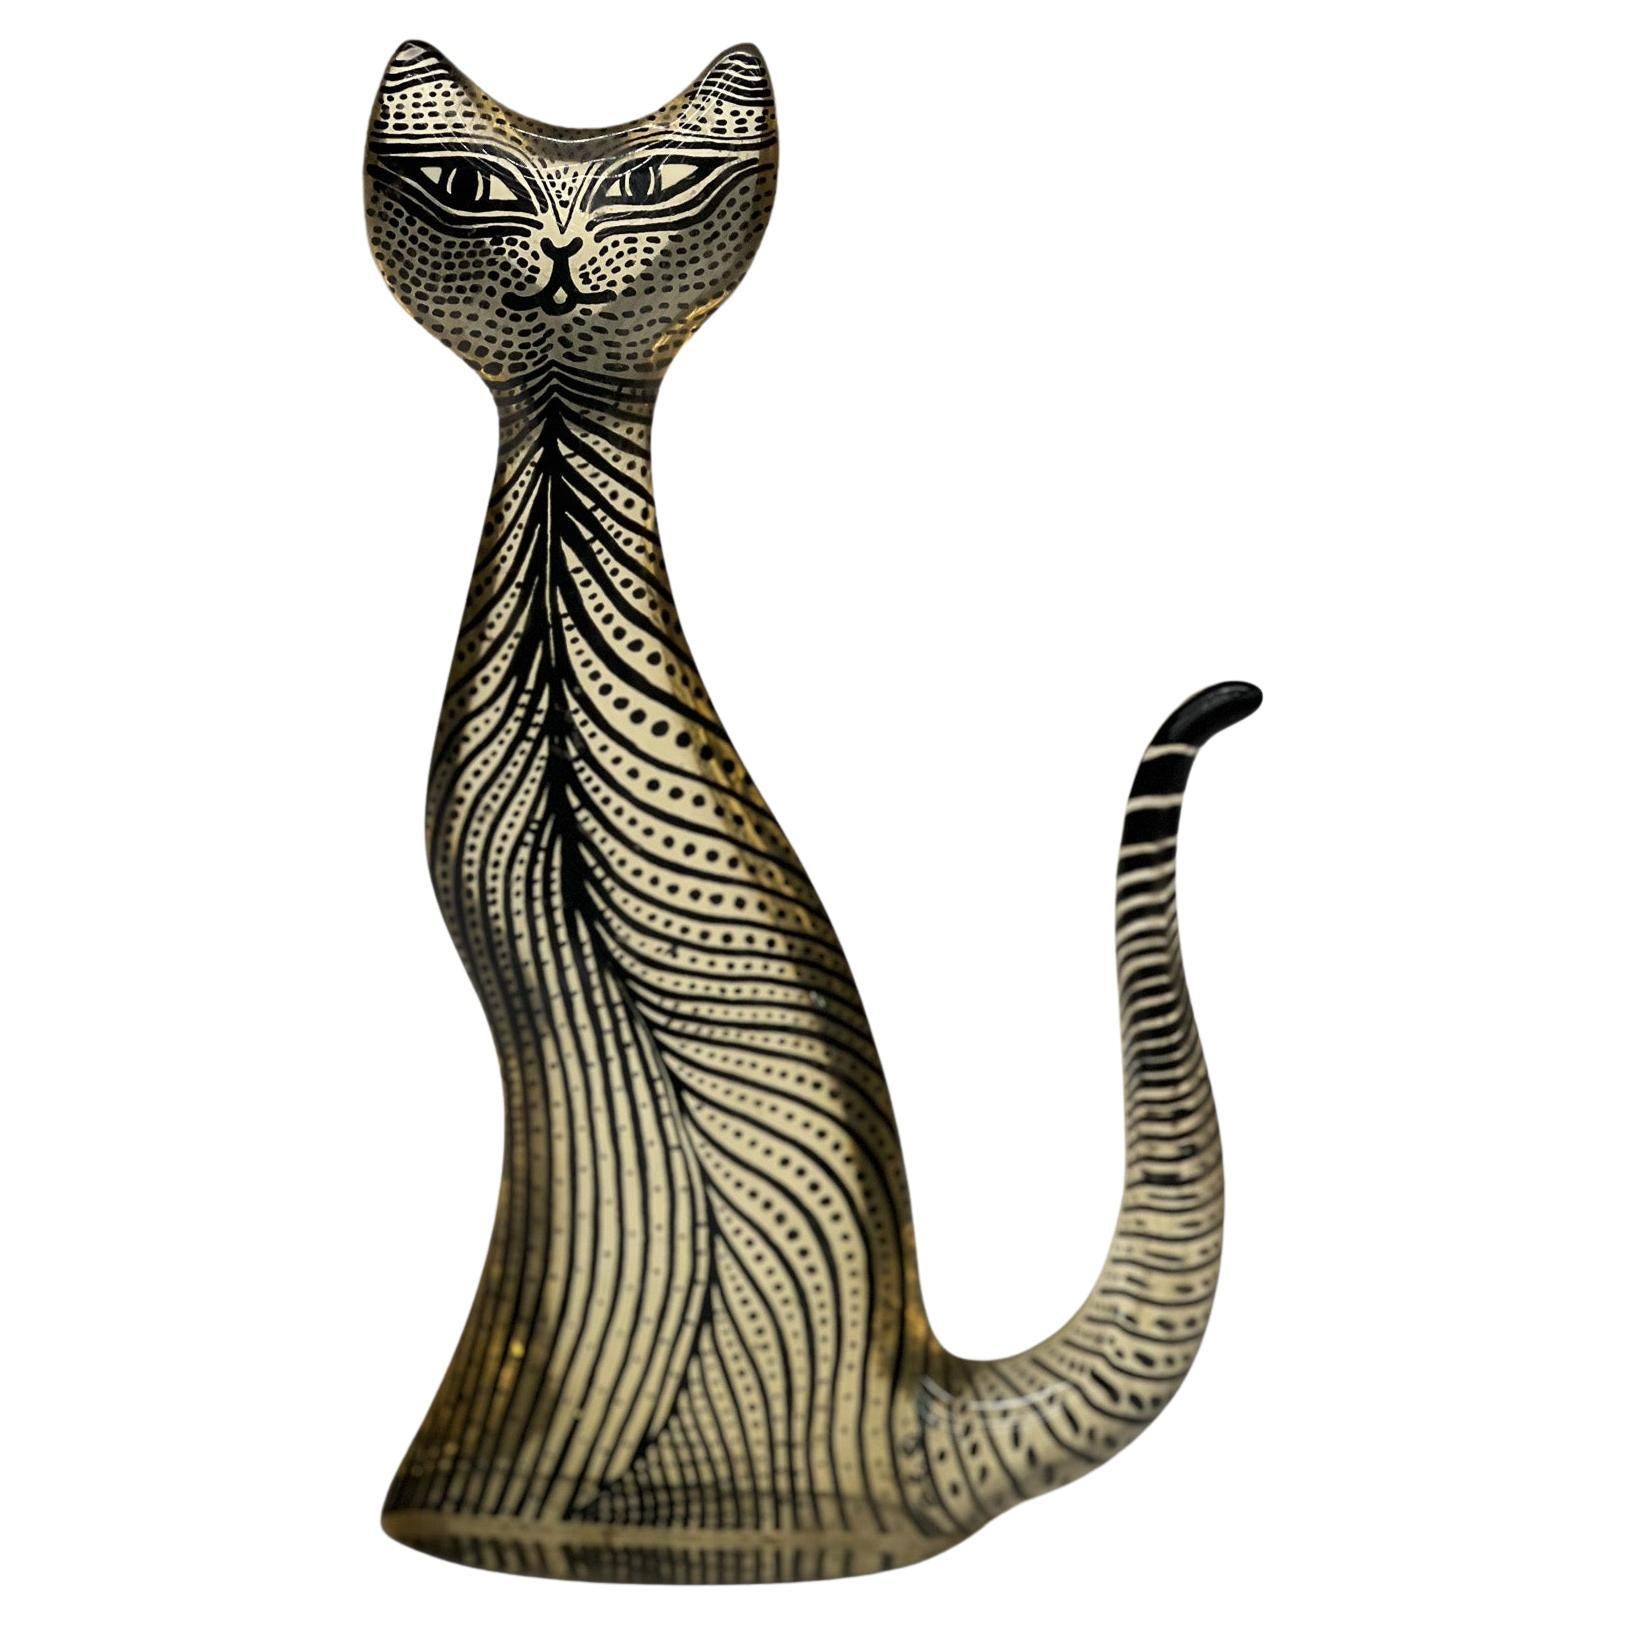 Brazilian Modern Kinetic Sculpture of a Cat in Resin by Abraham Palatinik, 1960s